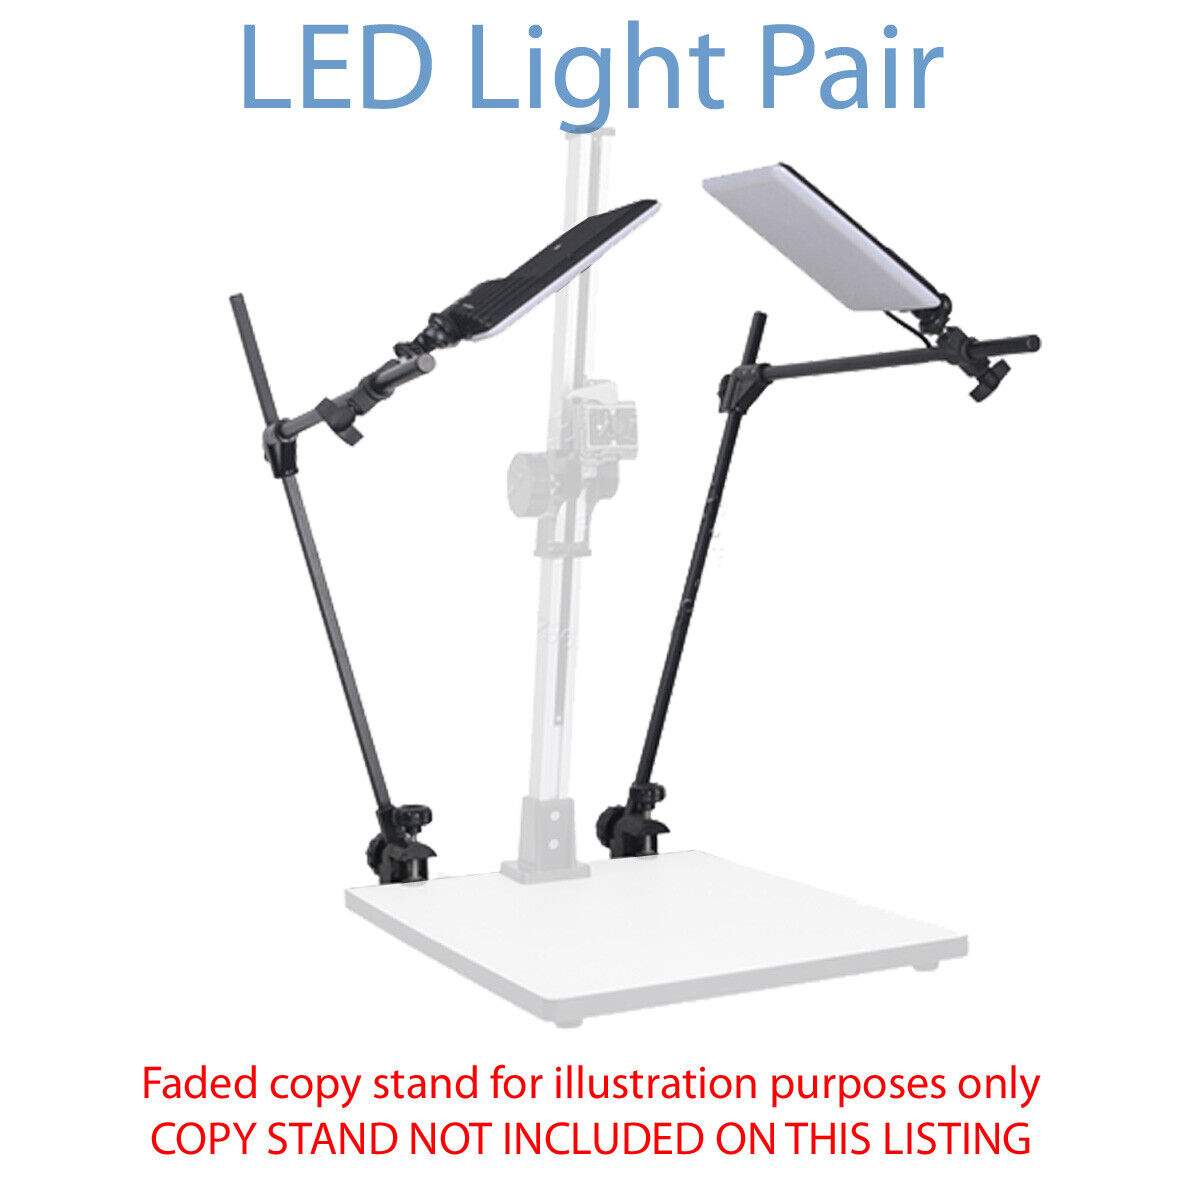 LED Panel Lights Pair for use with most Copy Stands Rostrums CRI-95 LED Panels